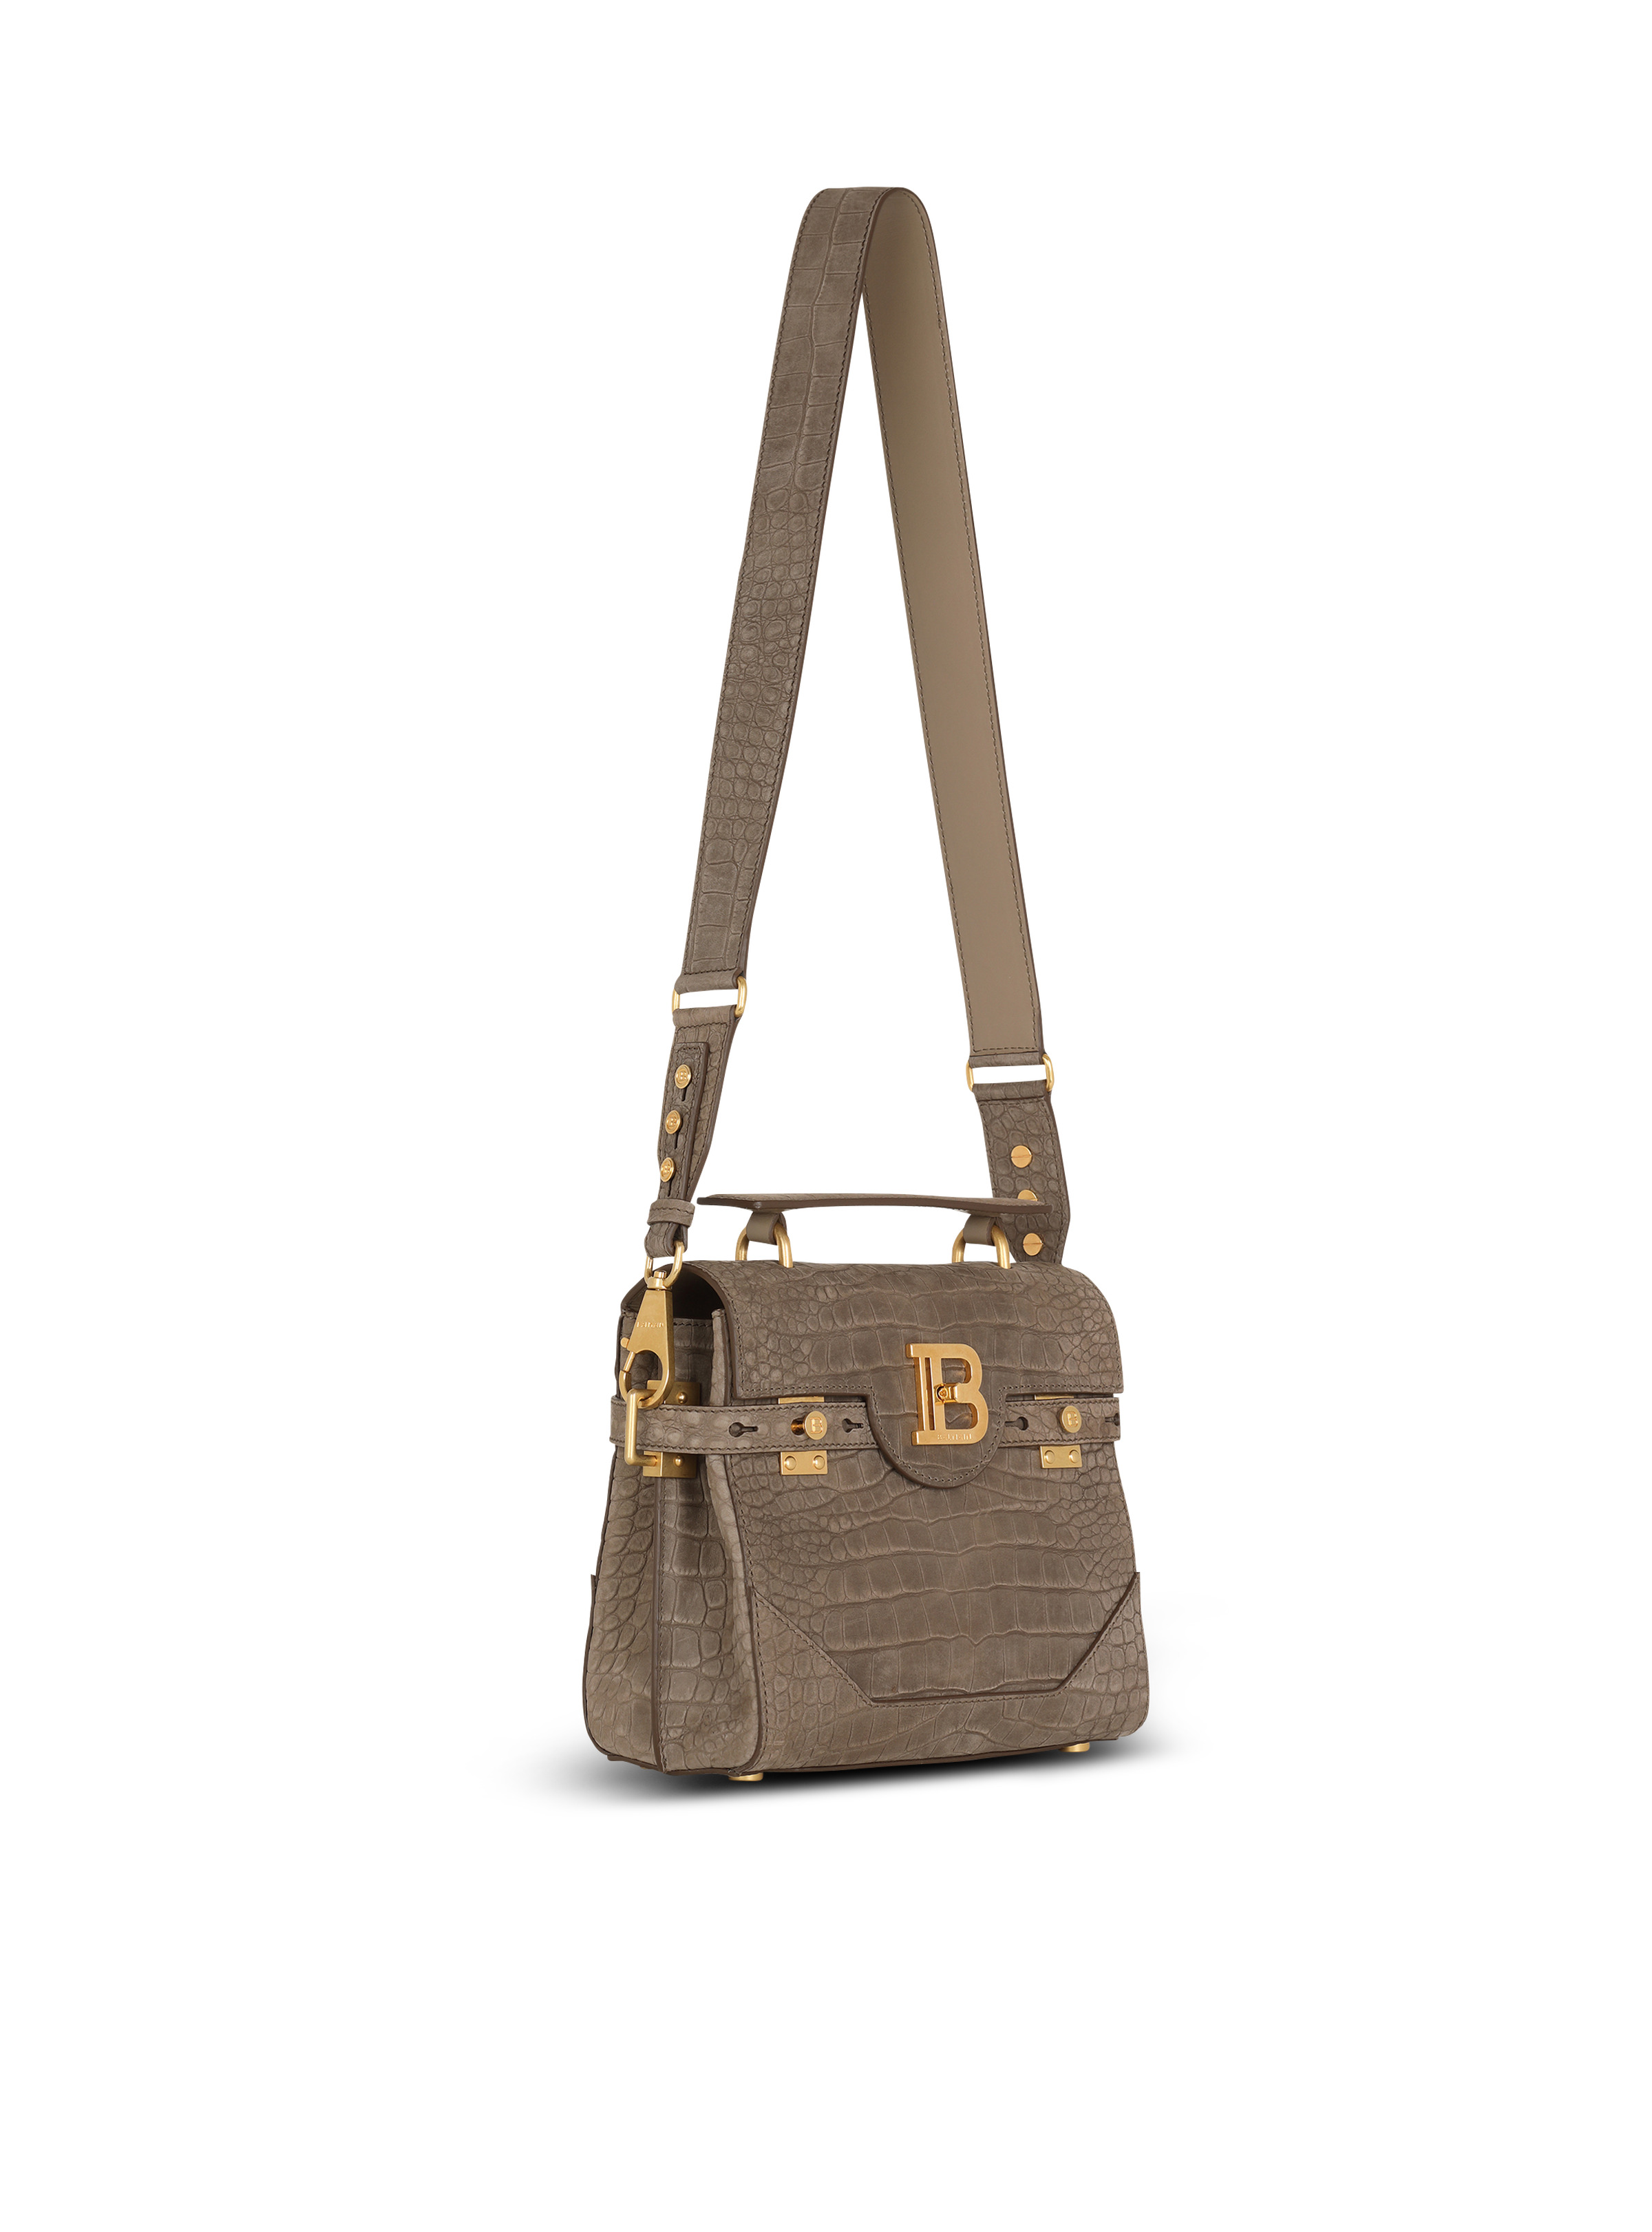 B-Buzz 23 bag in crocodile-embossed leather - 3